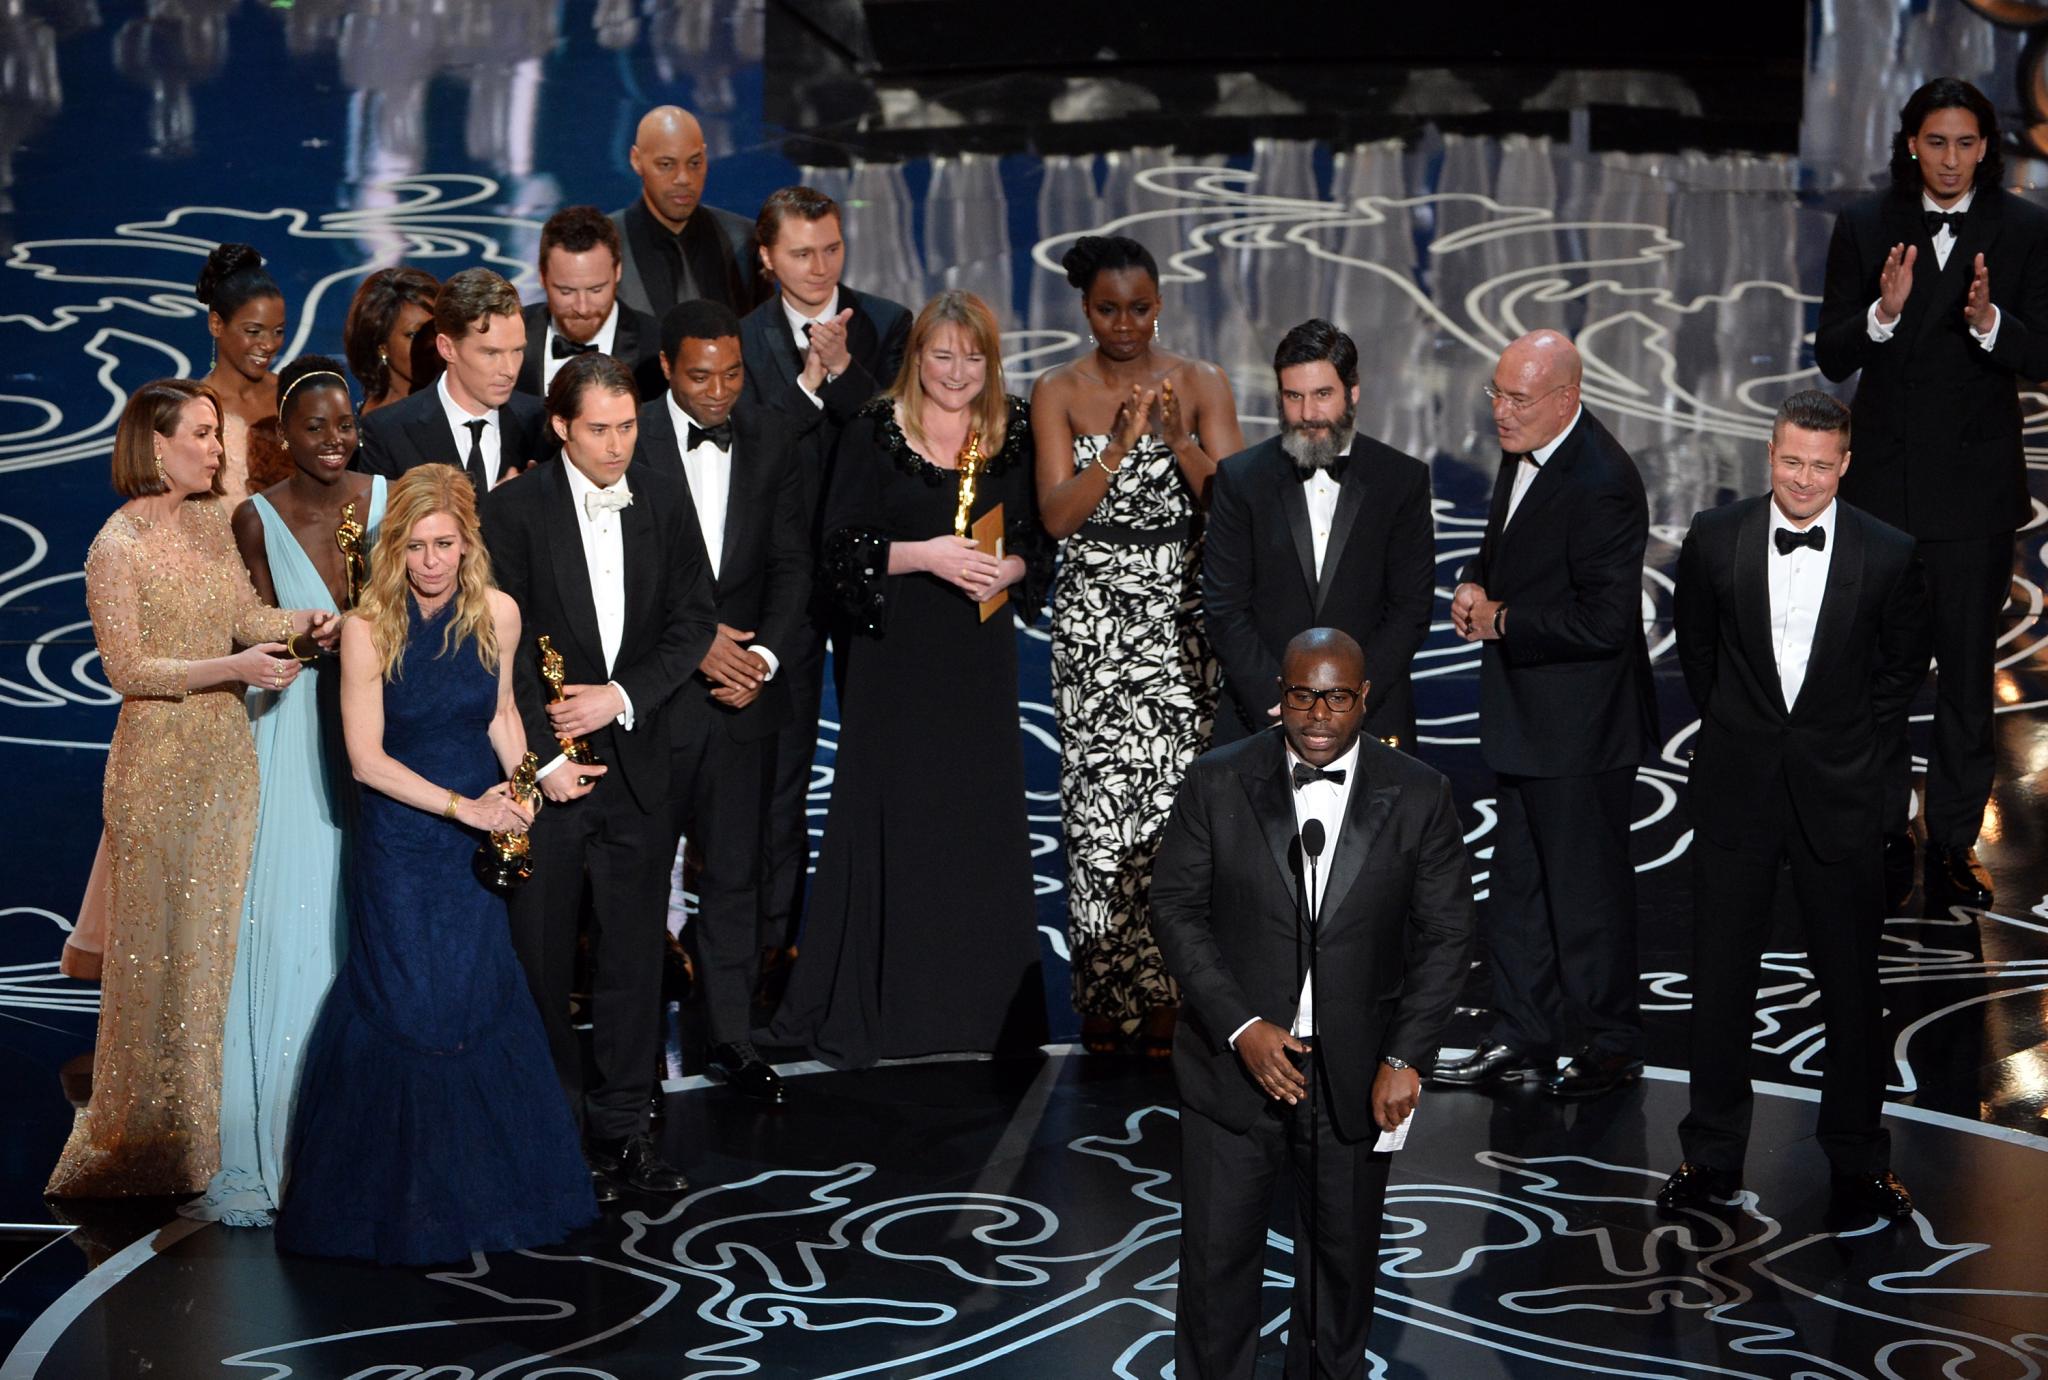 ’12 Years A Slave’ Wins Oscar for Best Picture, Makes History